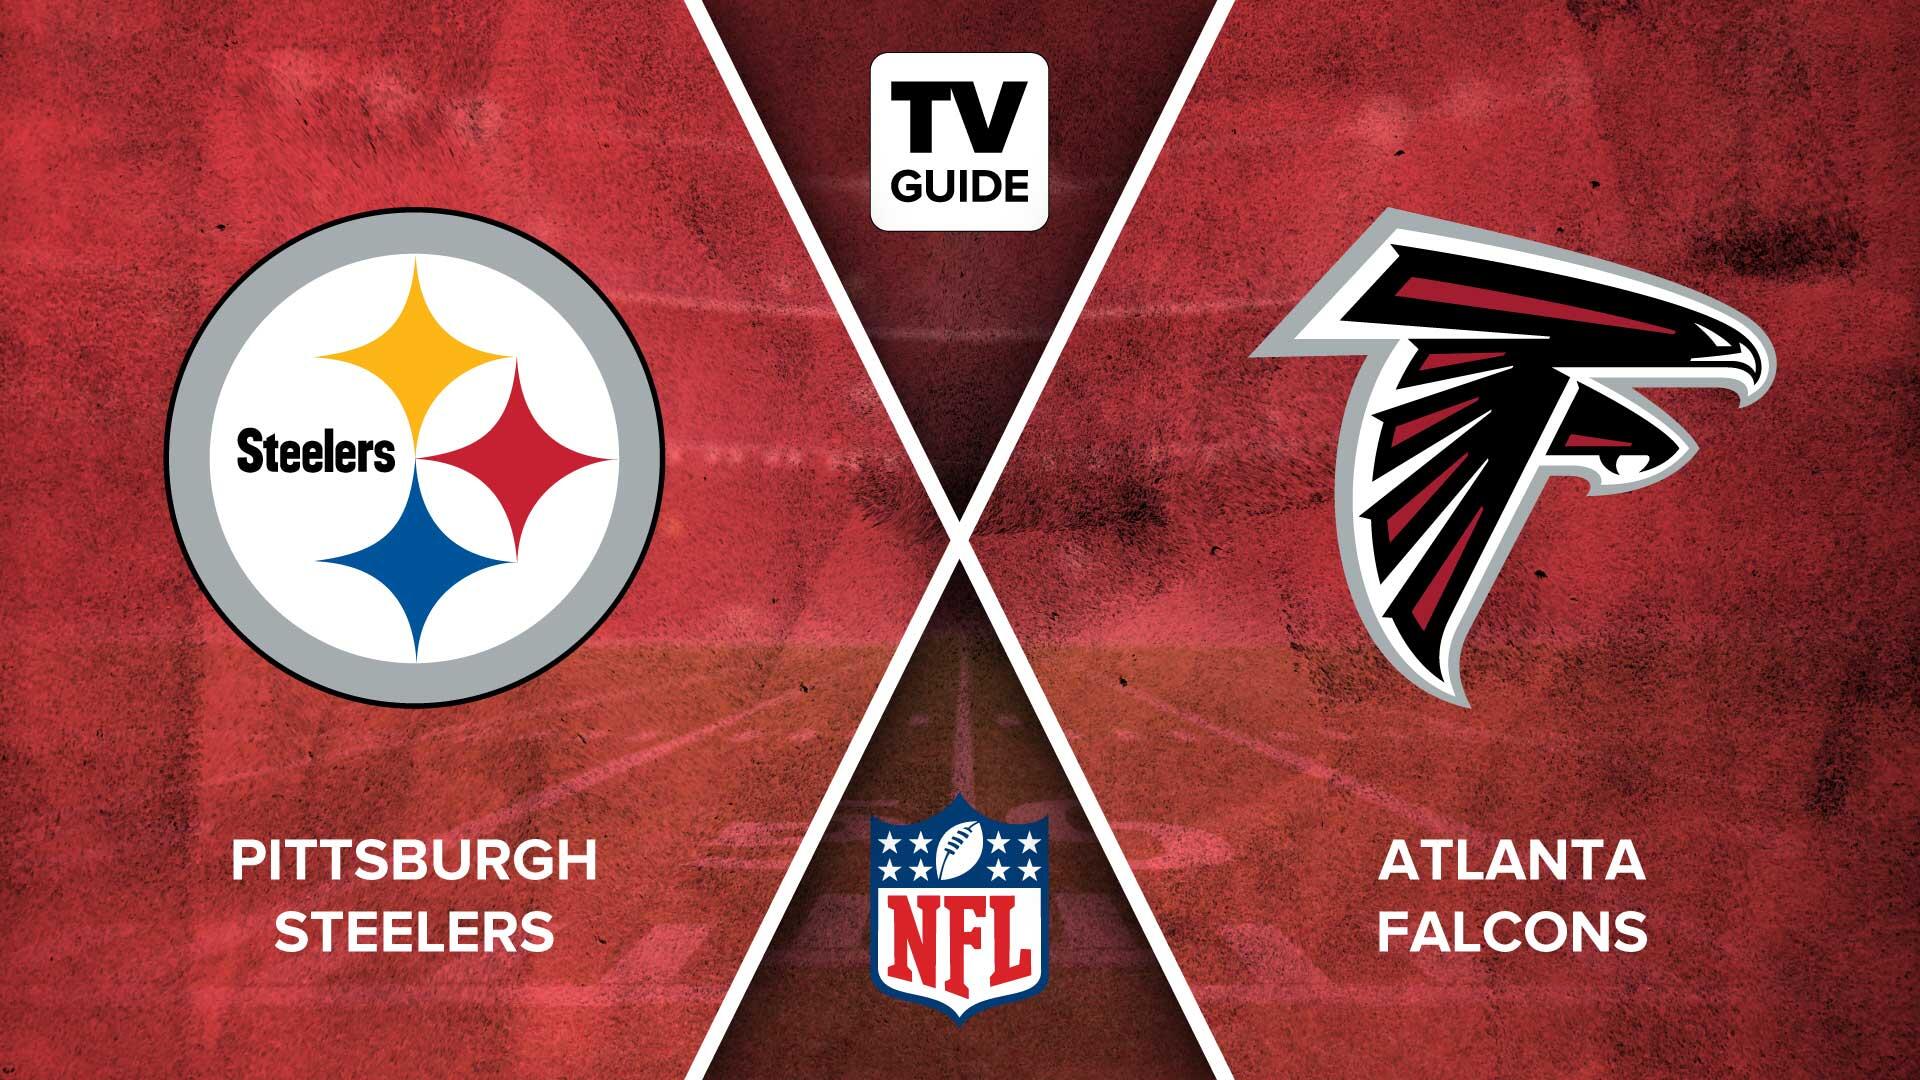 How to Watch Steelers vs. Falcons Live on 12/04 - TV Guide